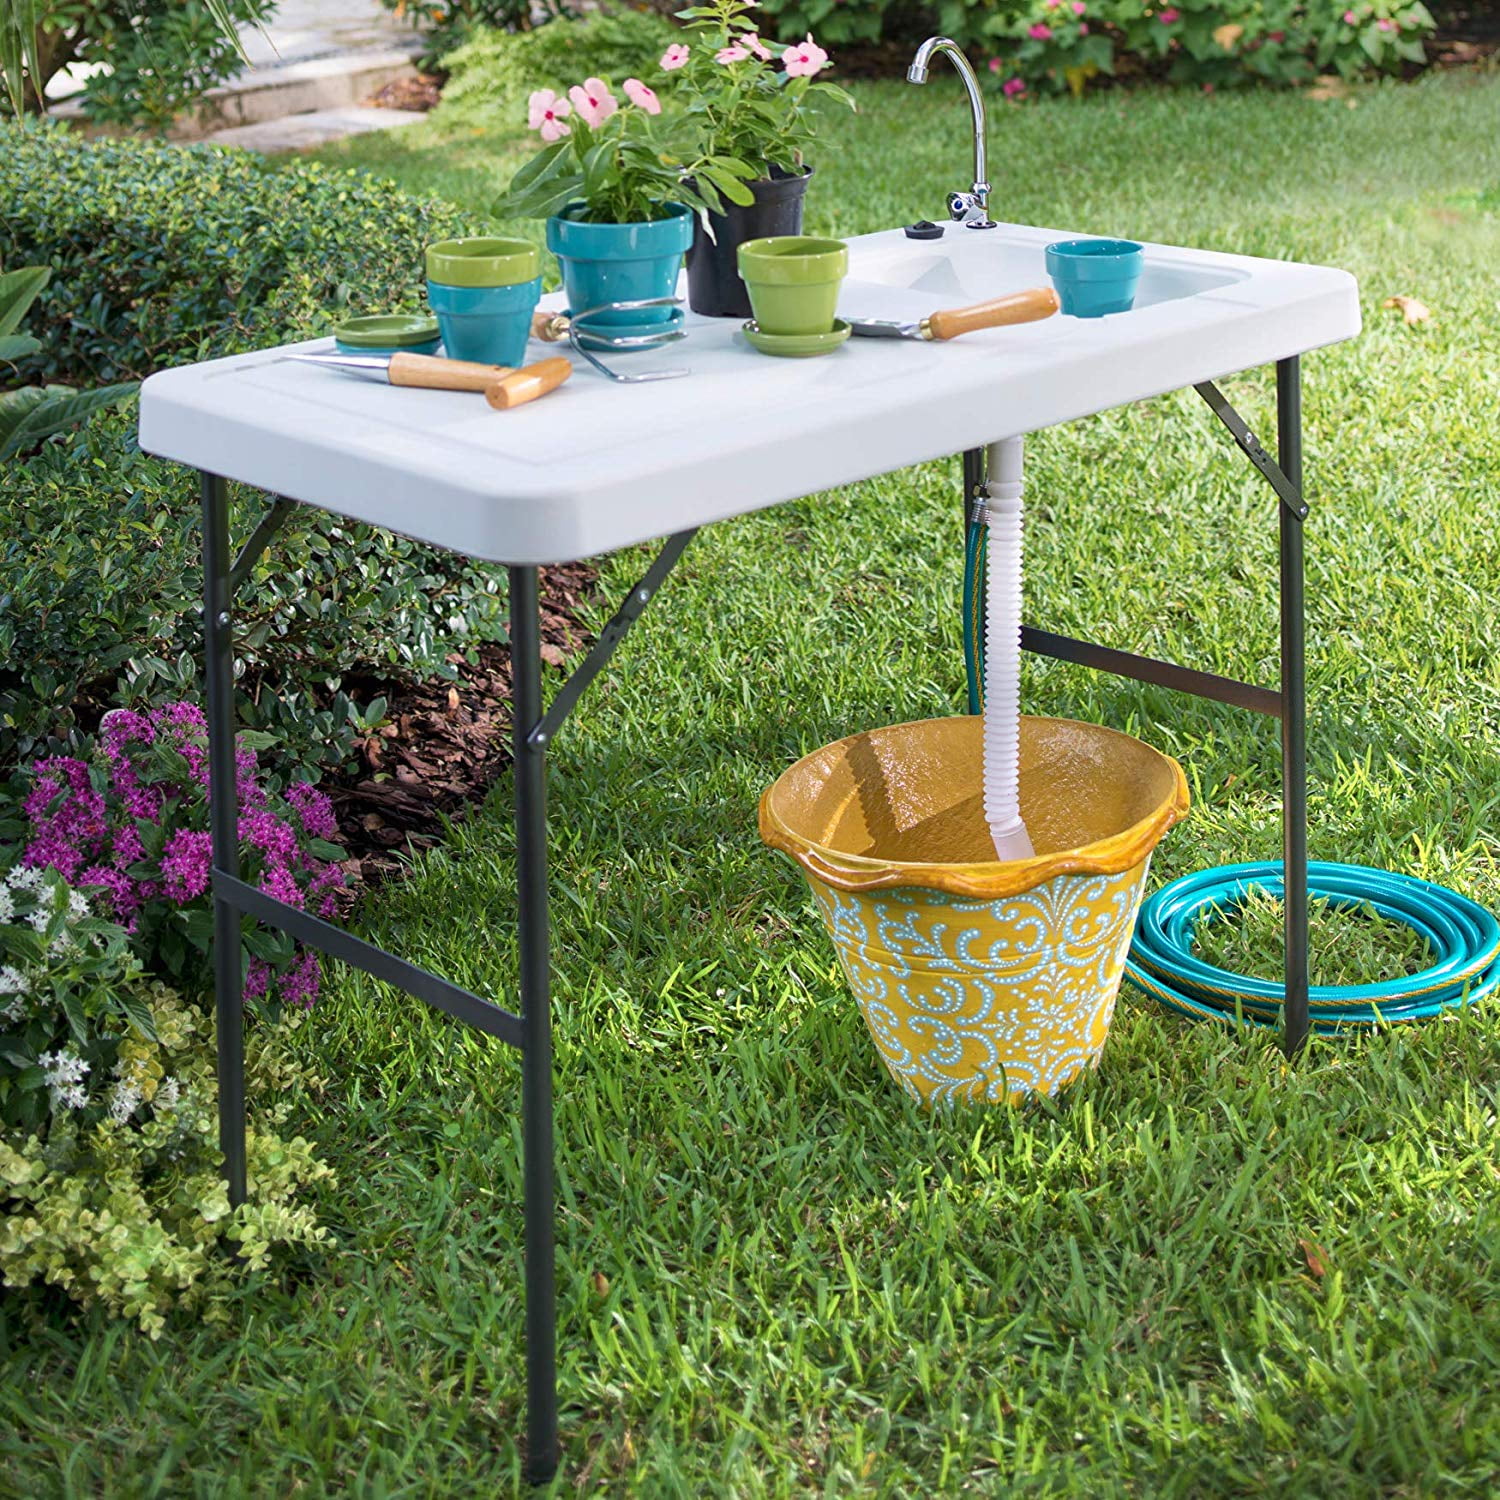 Outdoor Gardening Sink Table Cleaning Camping Grill Catering Planting Tools Food